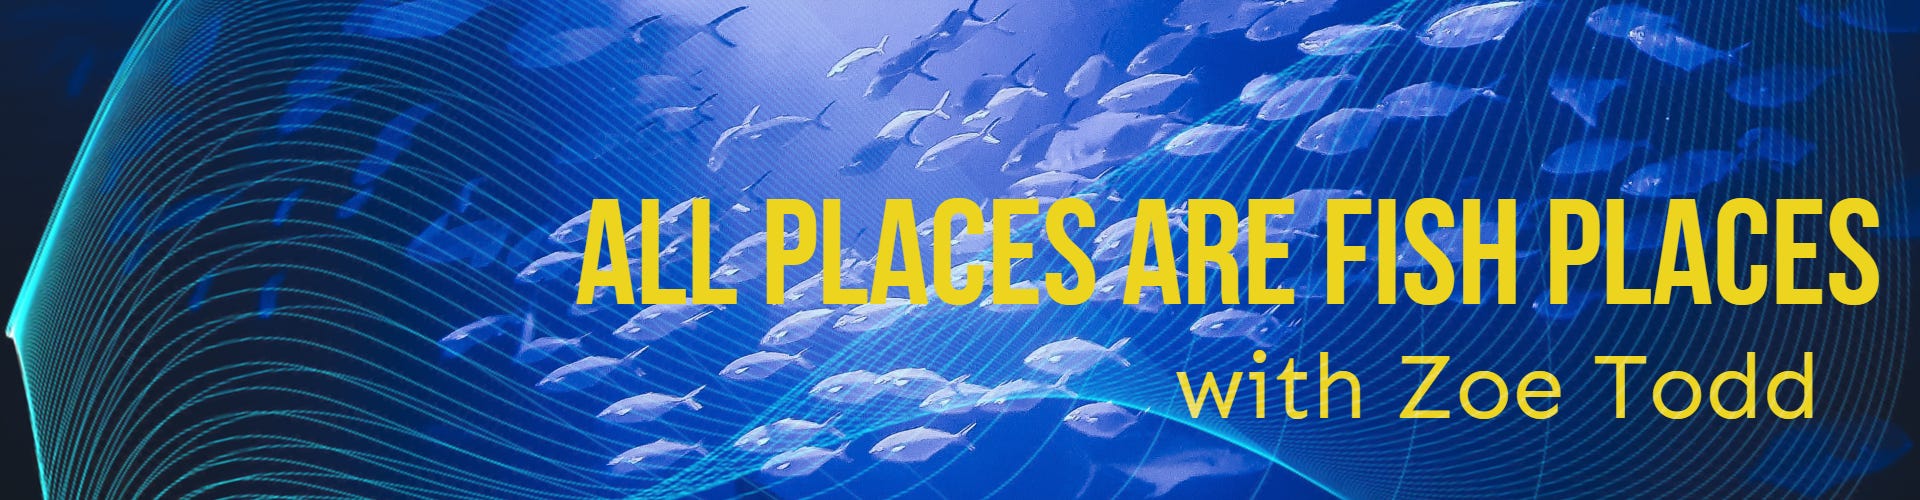 All places are fish places